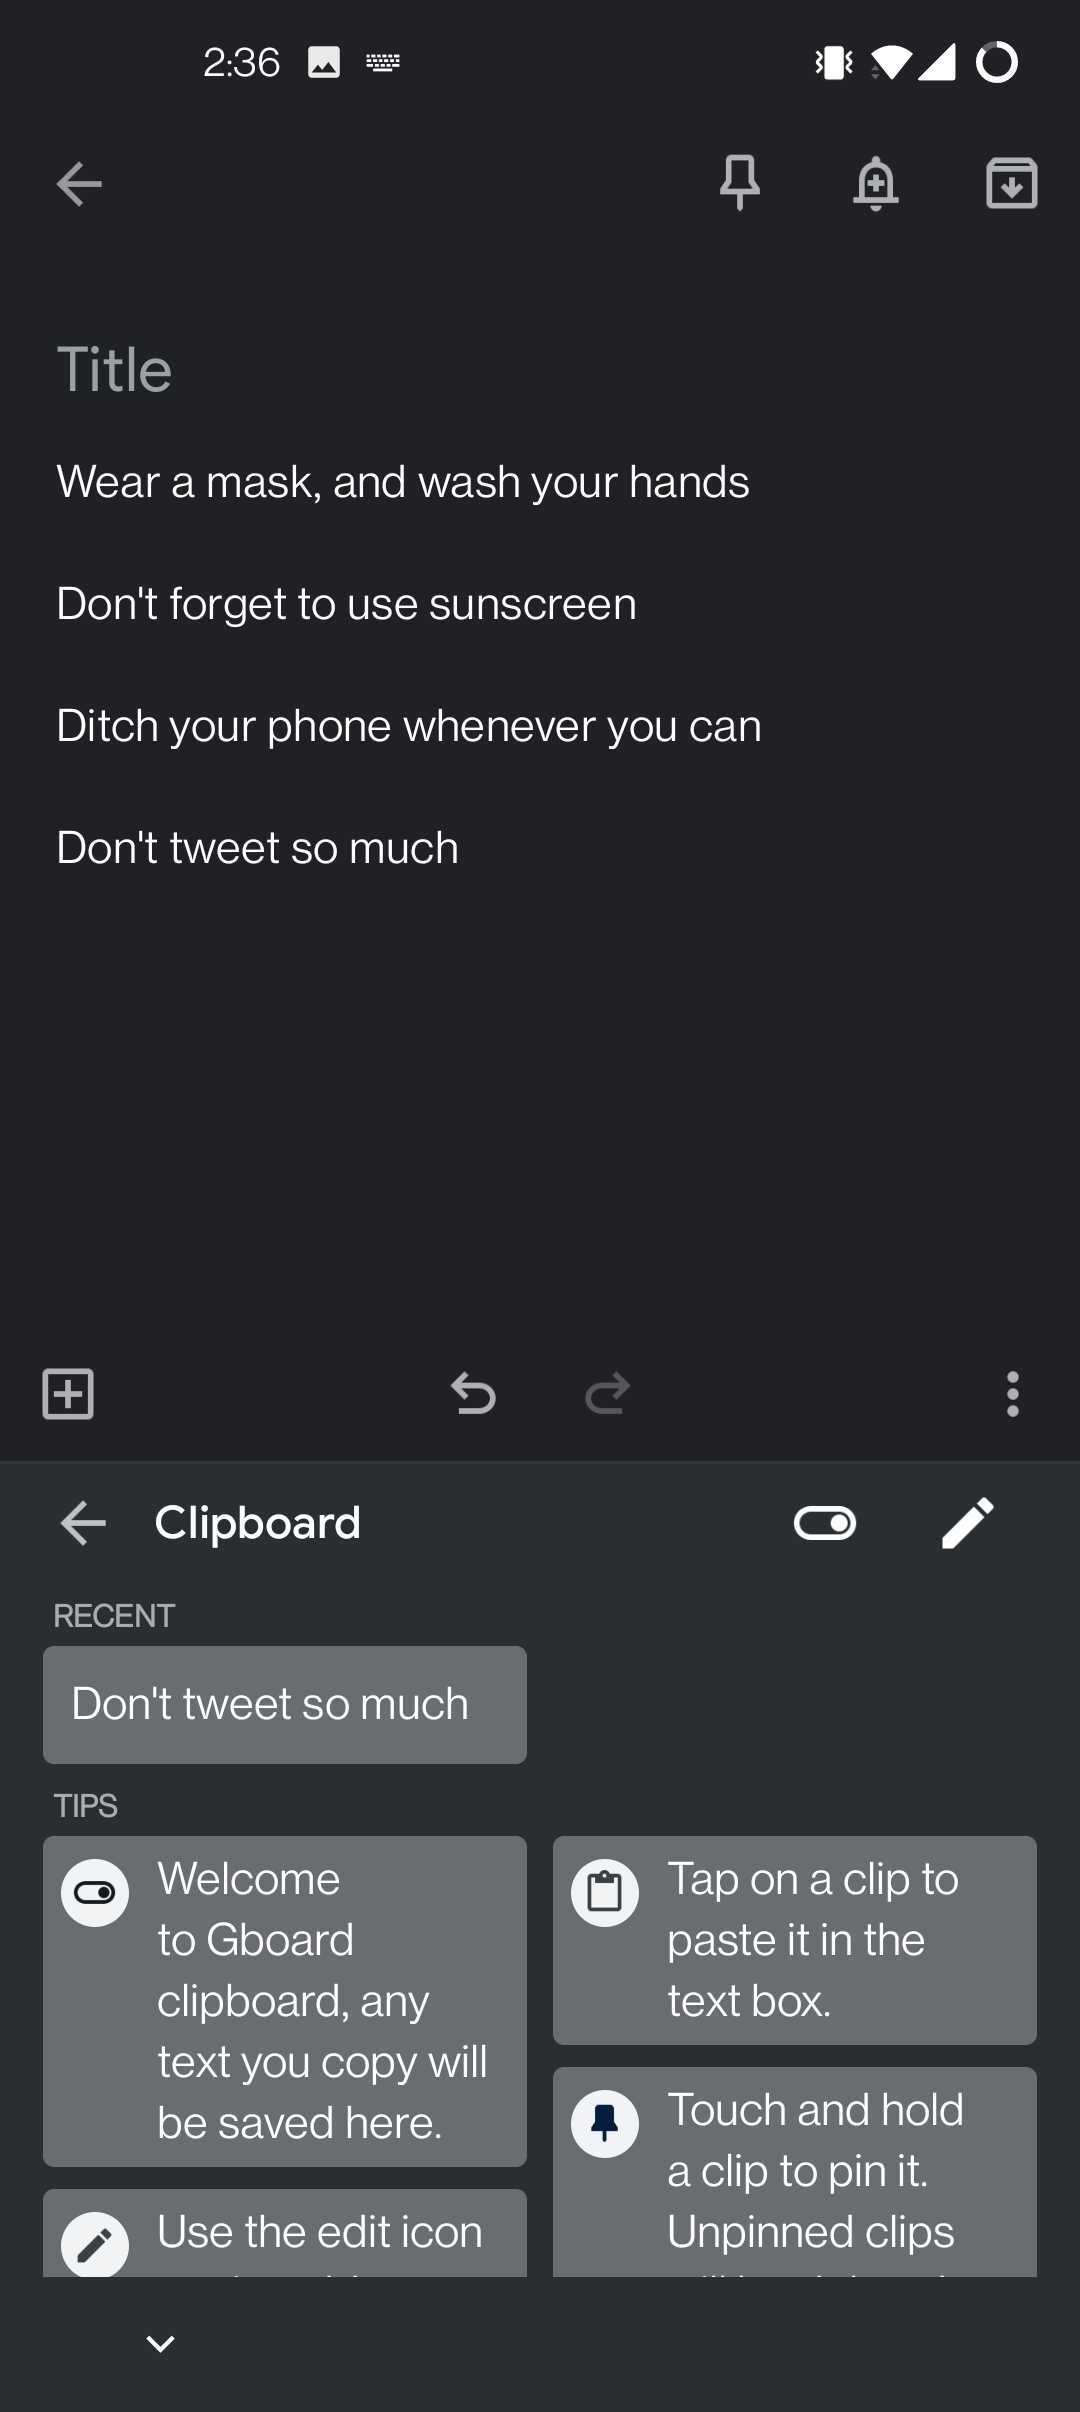 You can access saved snippets in Gboard's clipboard with a couple of taps